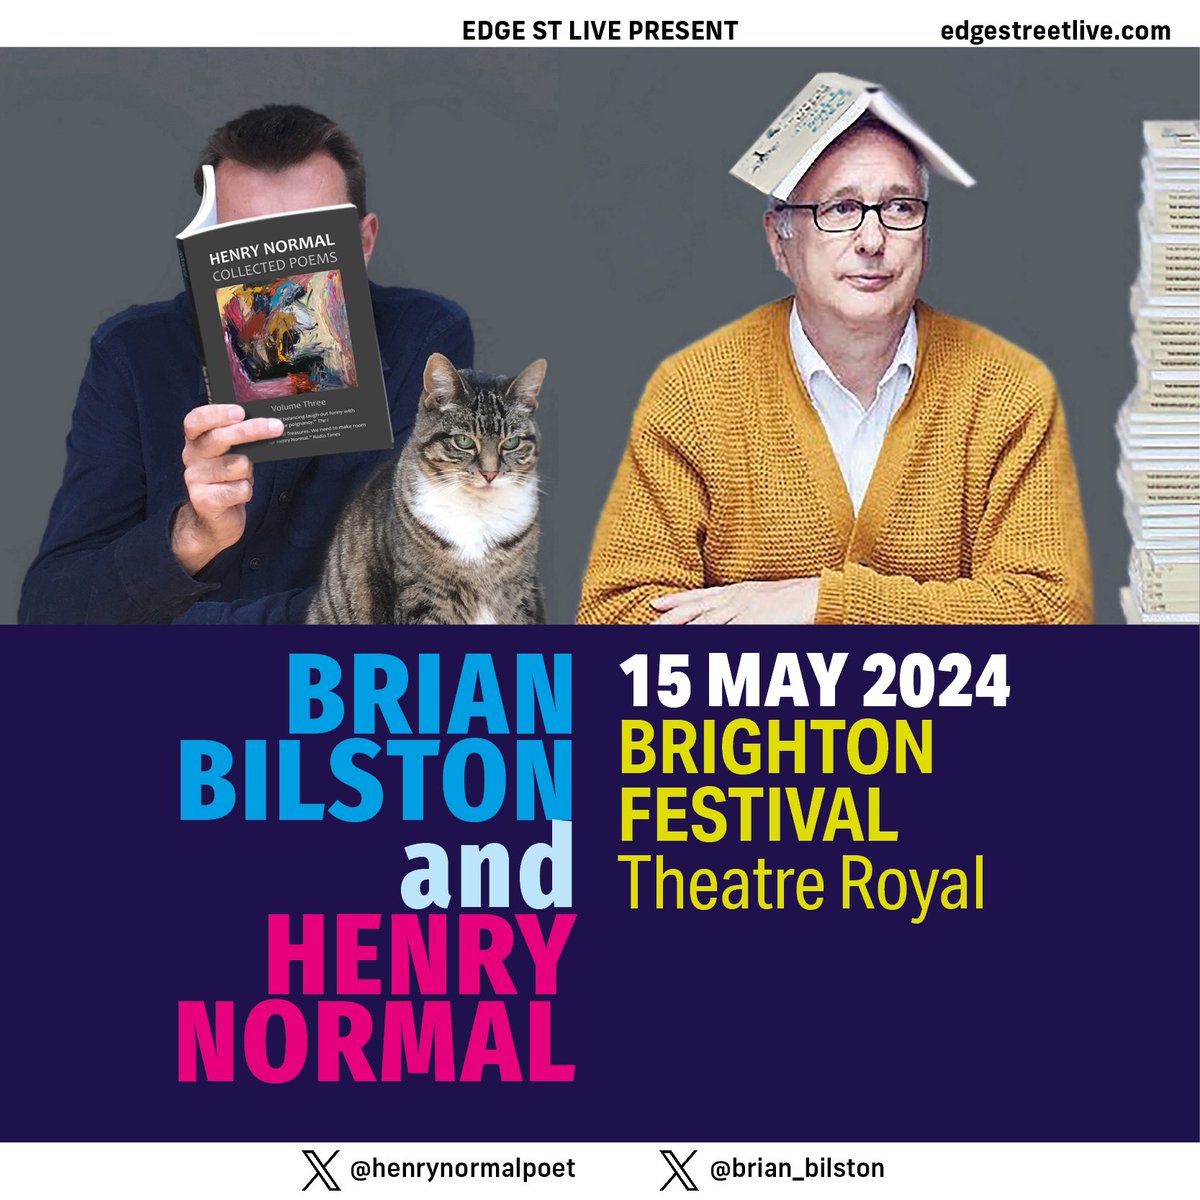 I’ll be reading poems at the Brighton Festival tomorrow evening, alongside the very wonderful @HenryNormalpoet. Please note the event has been moved to a bigger venue: the Theatre Royal. Tickets available here: brightonfestival.org/whats-on/Xwl-h… @brightfest